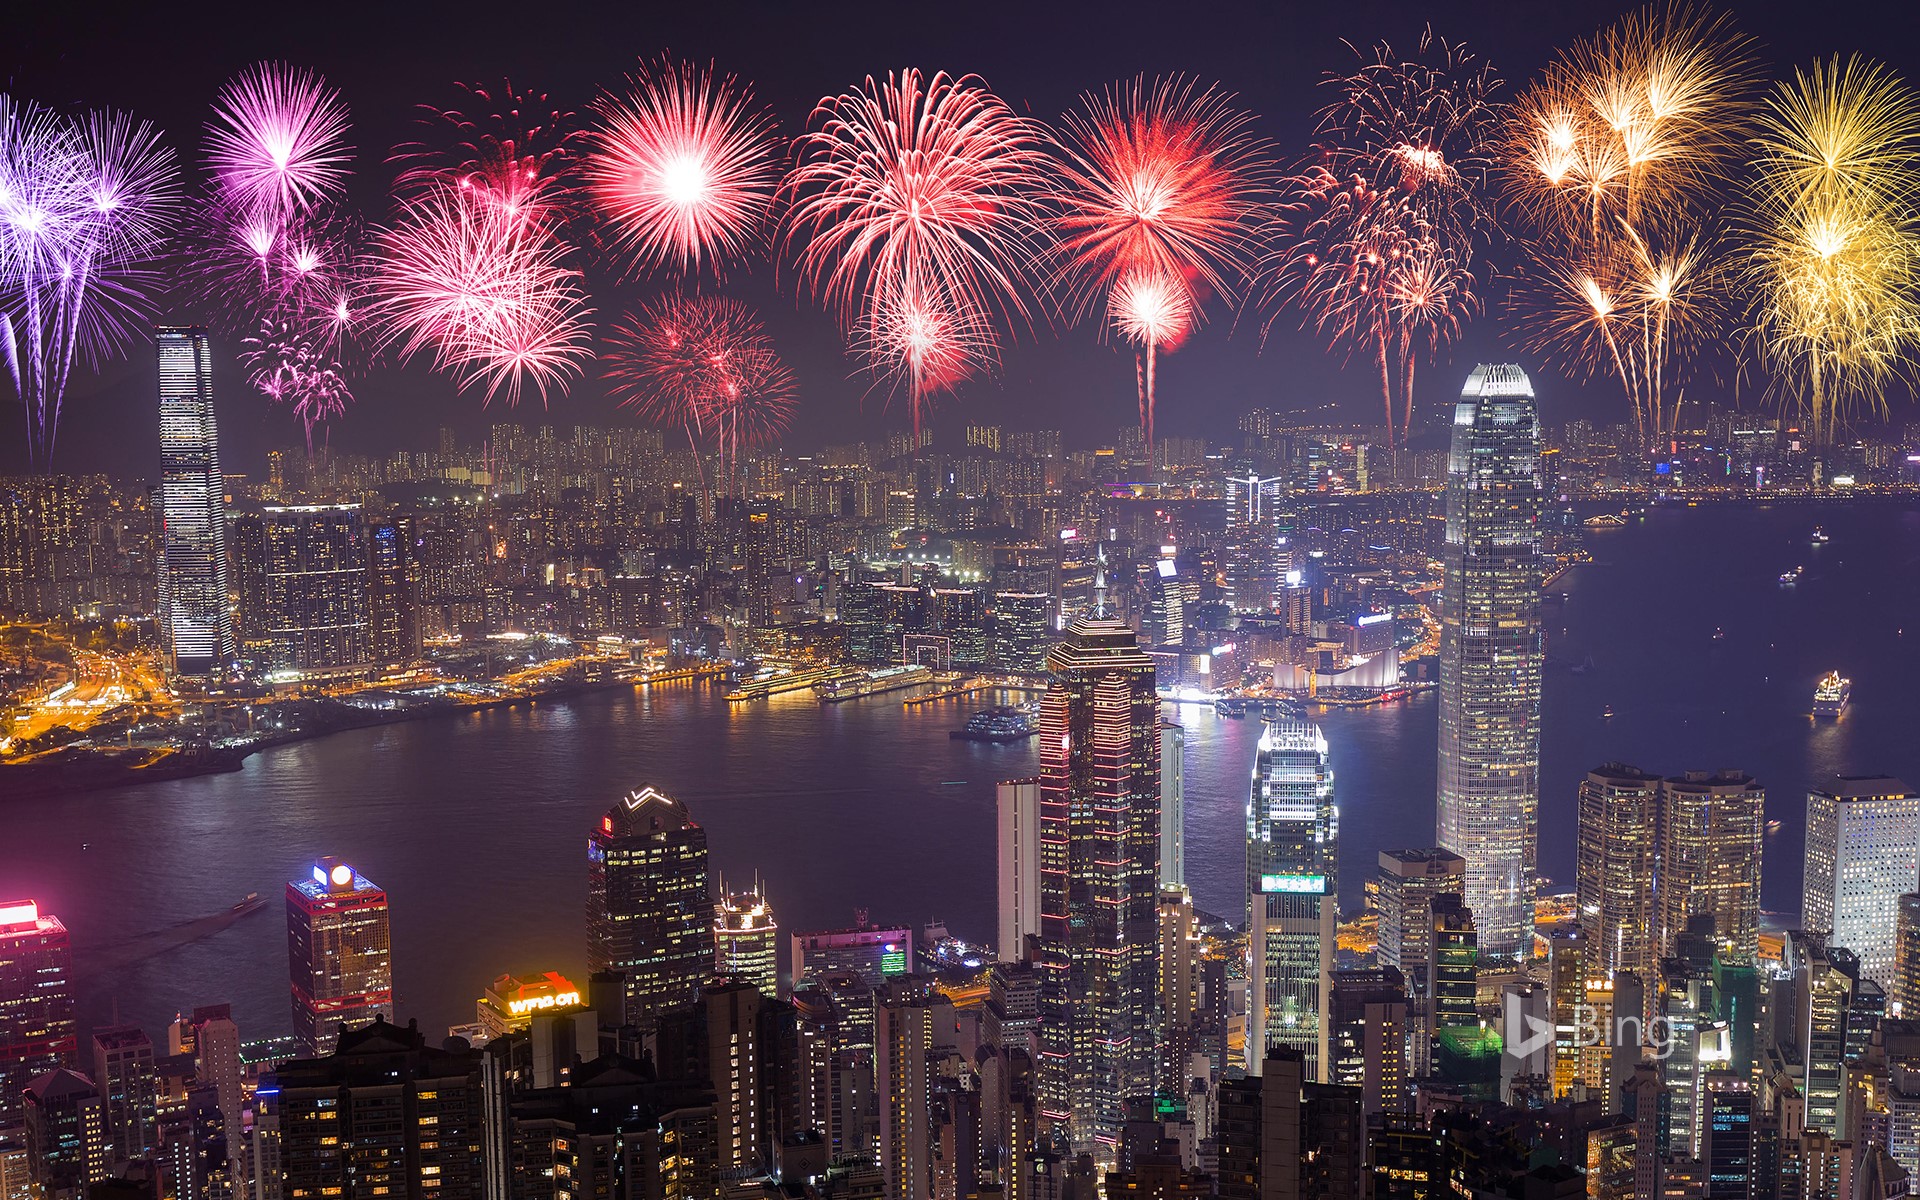 [New Year's Eve Today] Bright fireworks greet the New Year, Hong Kong, China